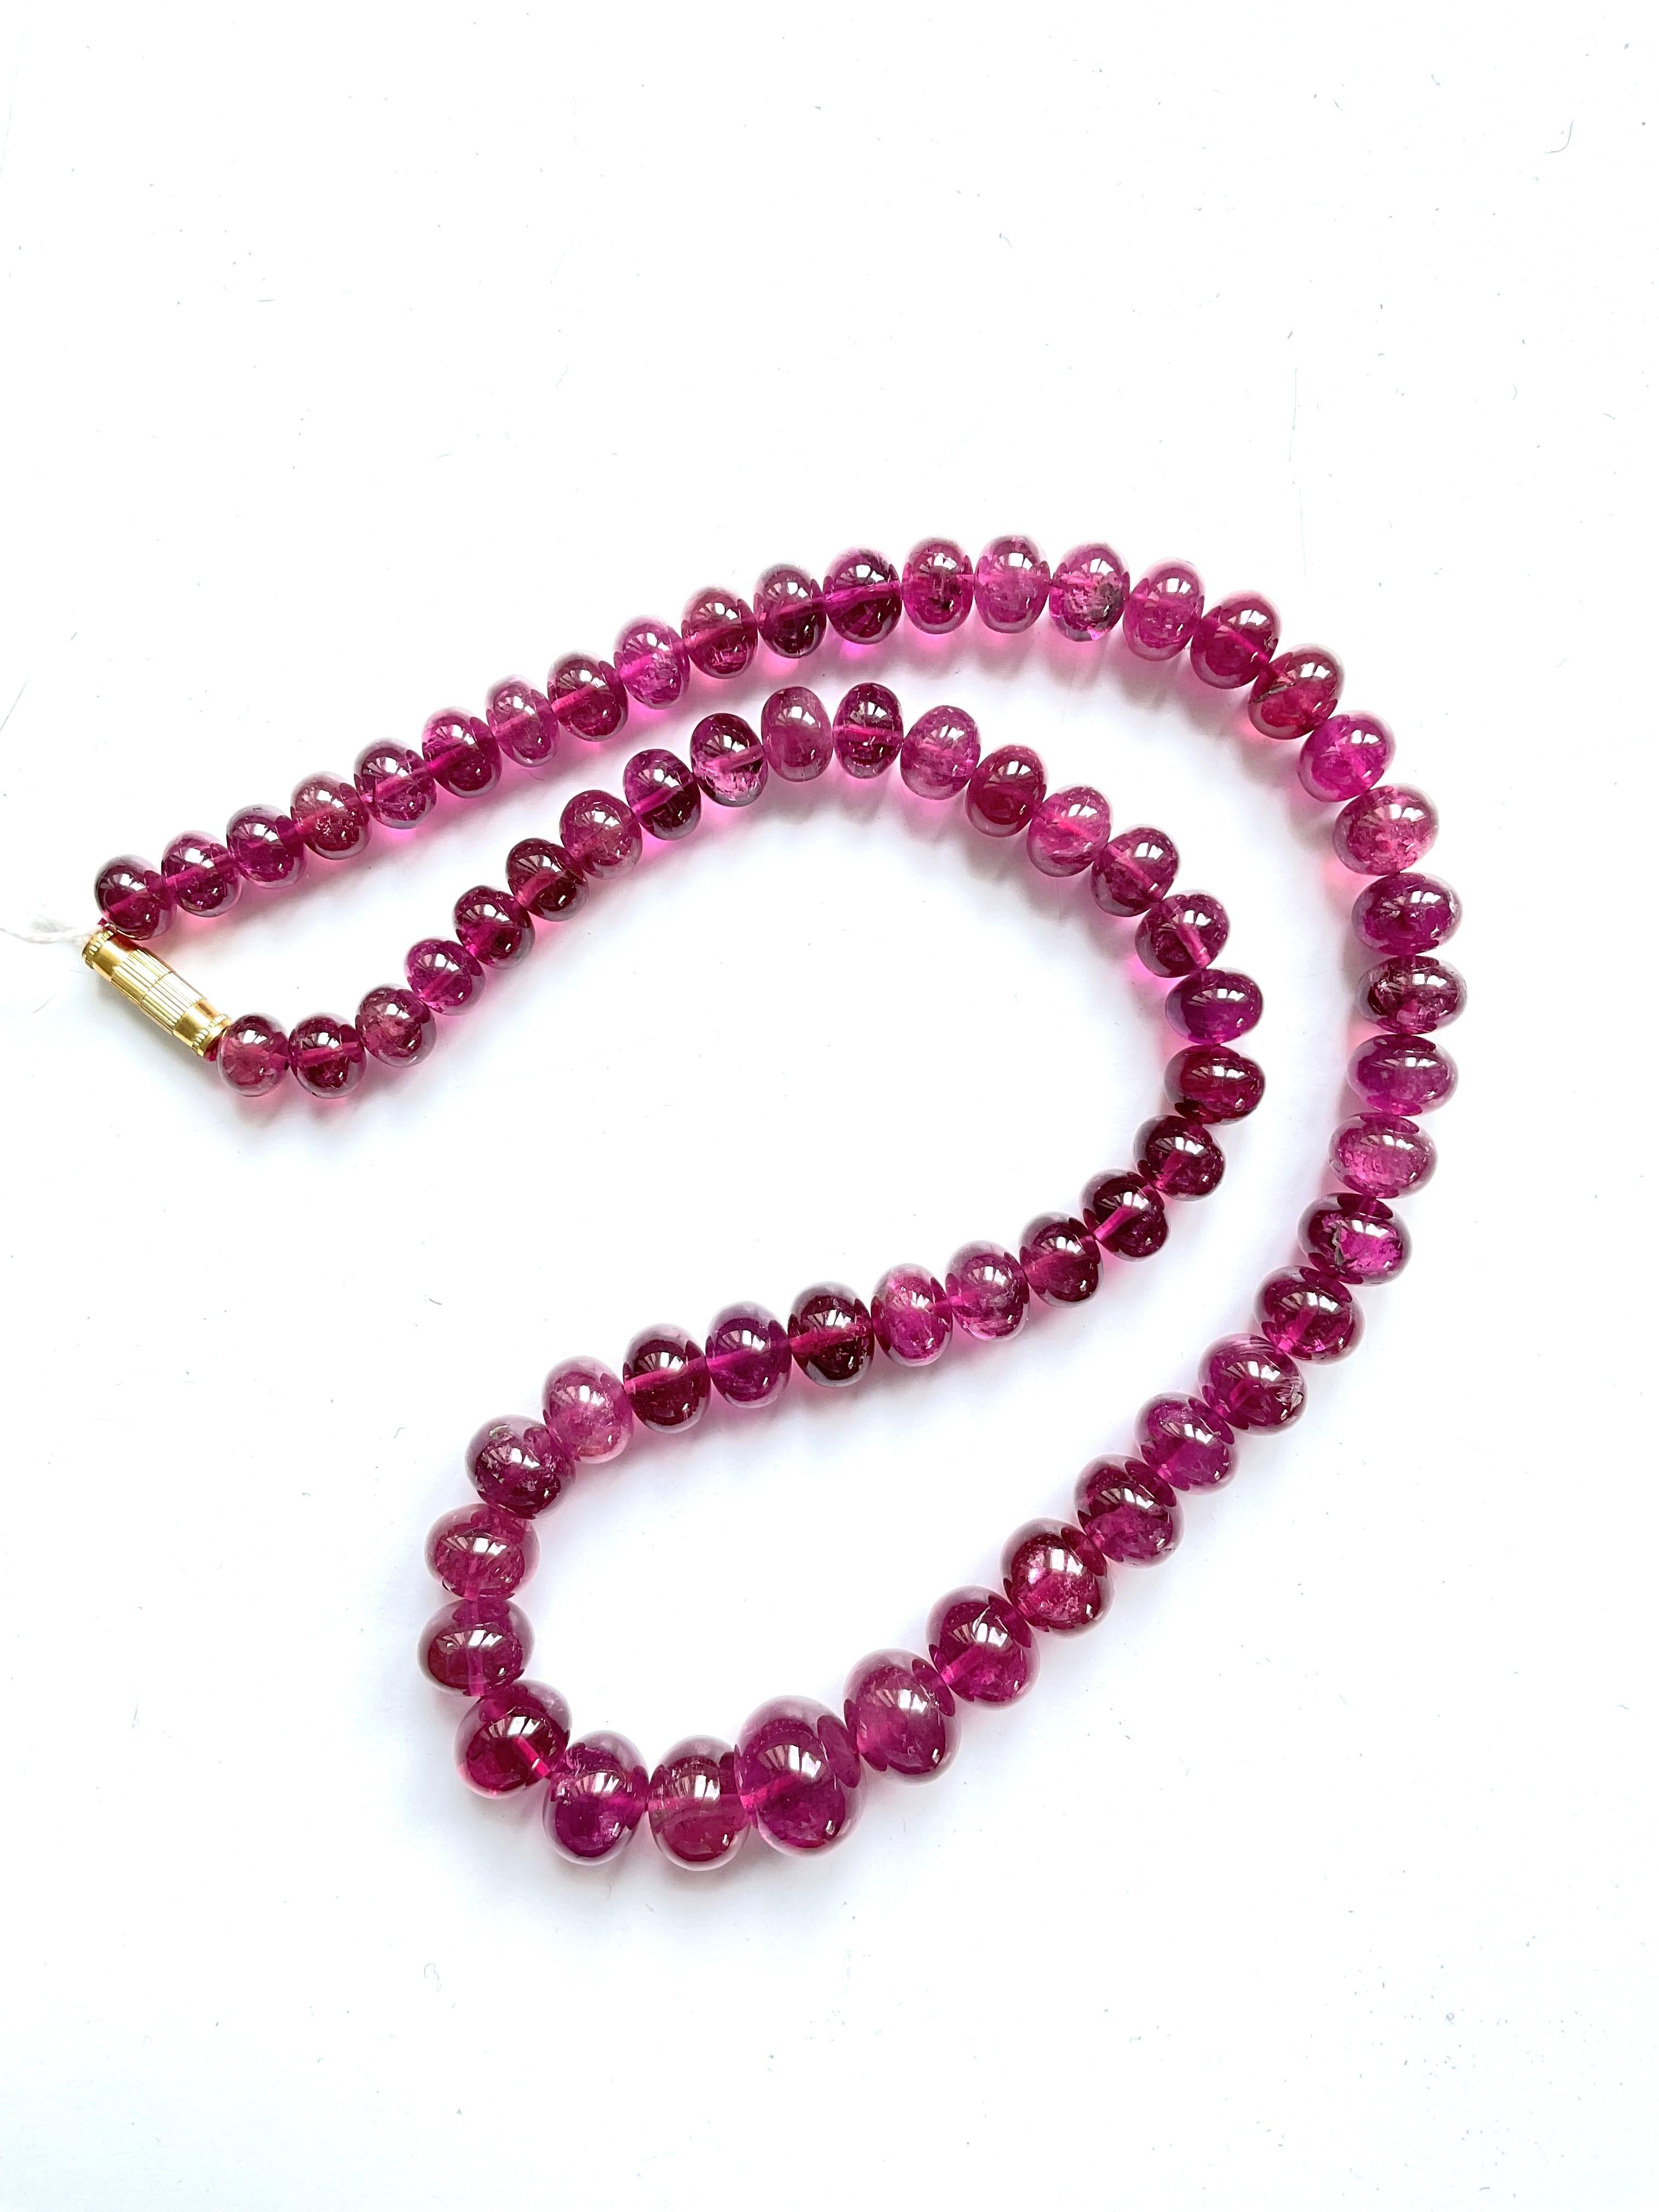 335.01 Carats Top Quality Rubellite Tourmaline Beads Natural Gemstones necklace For Sale 1